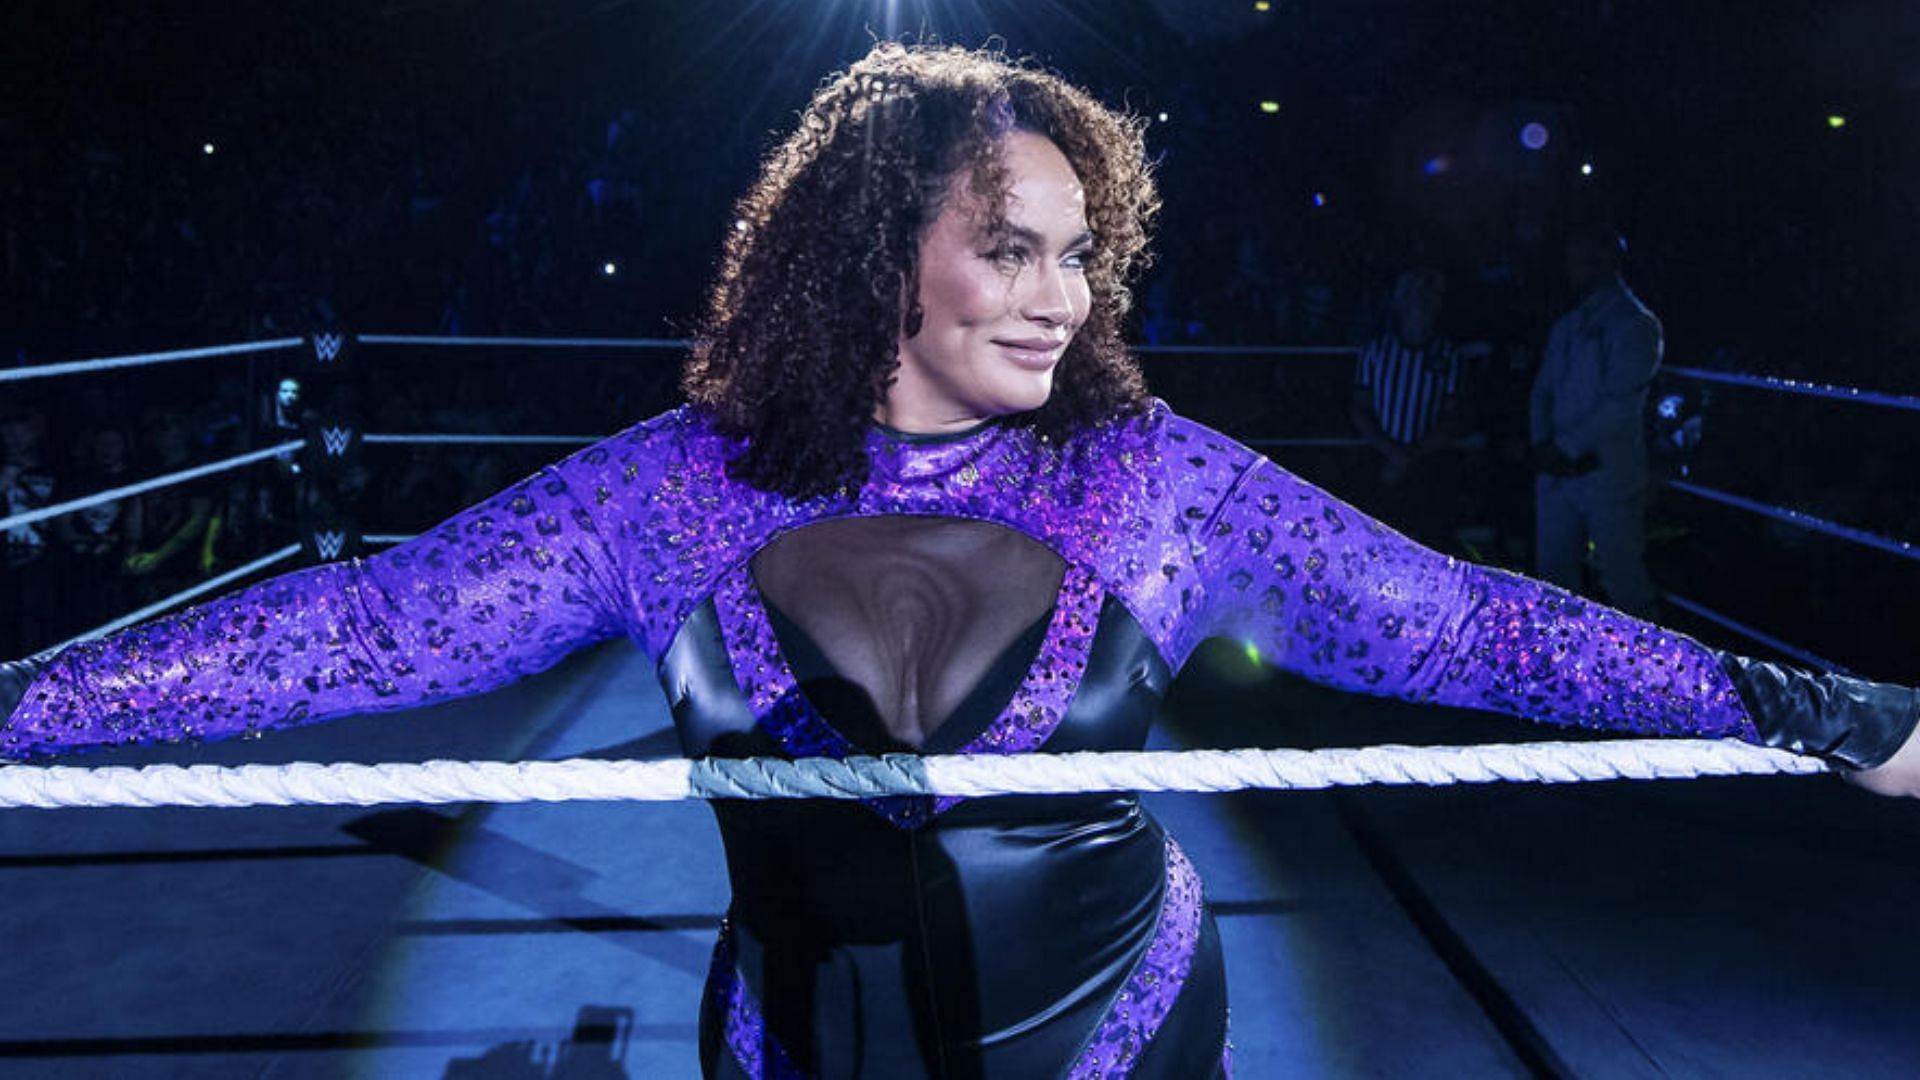 Nia Jax is now exclusive to Friday Night SmackDown (Credit: WWE)